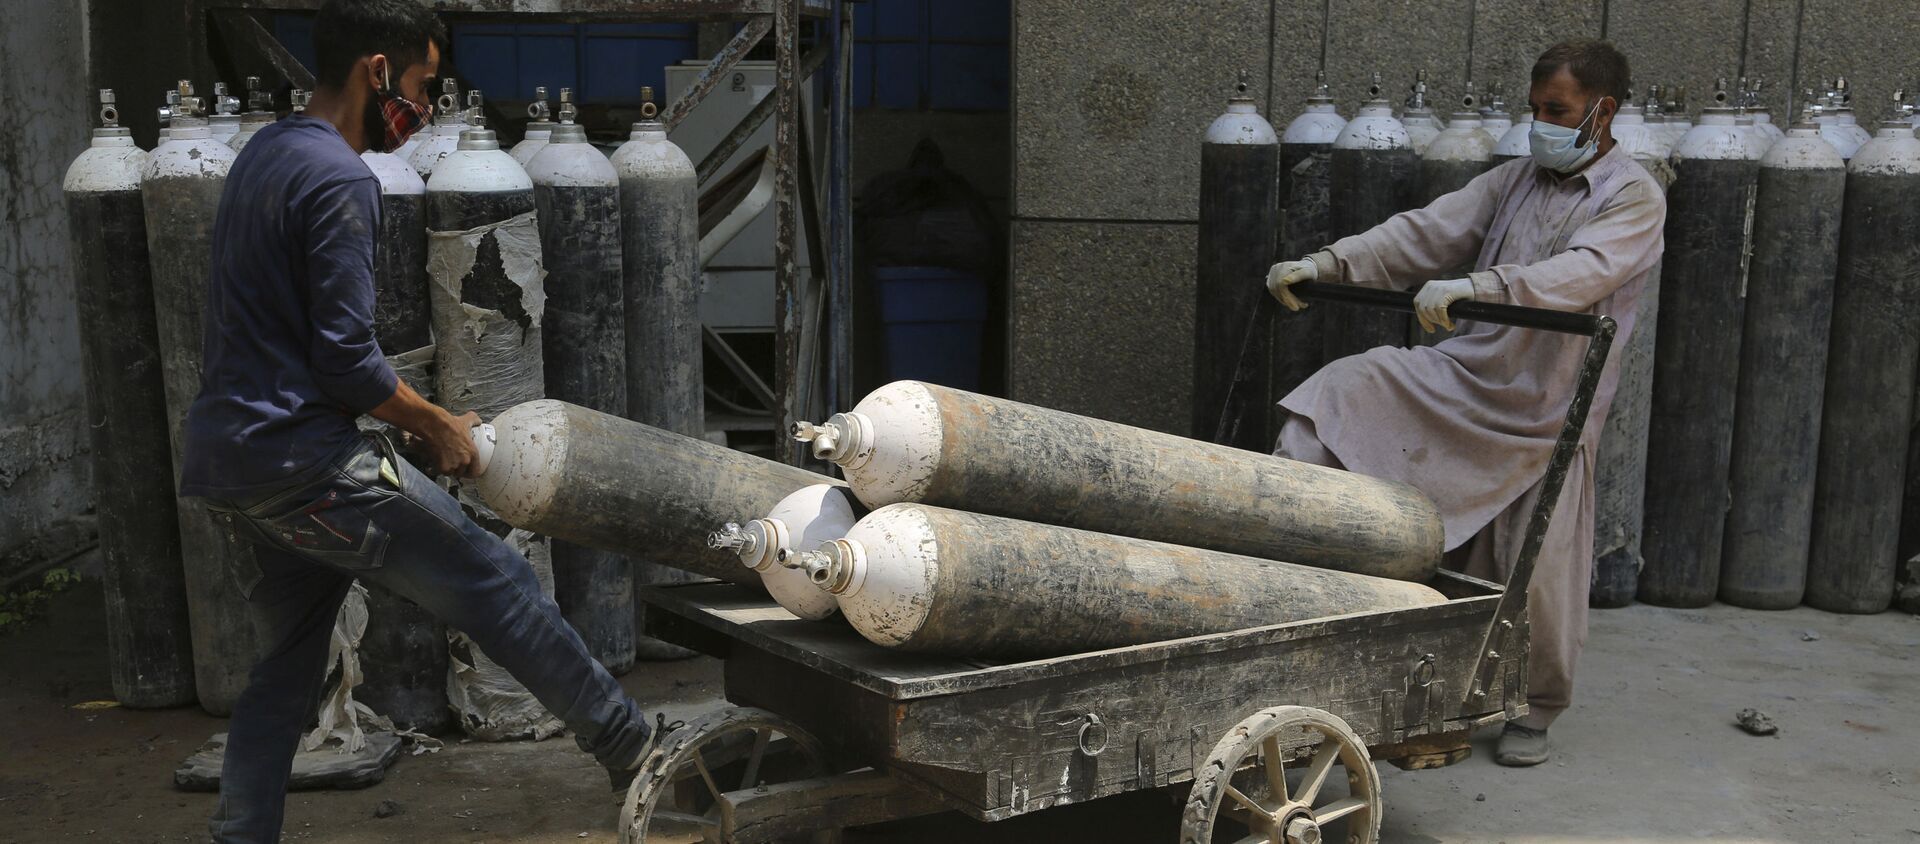 Workers load oxygen cylinders onto a hand cart to be carried inside the COVID-19 wards at a government run hospital in Jammu, India, Friday, May 7, 2021 - Sputnik International, 1920, 24.05.2021